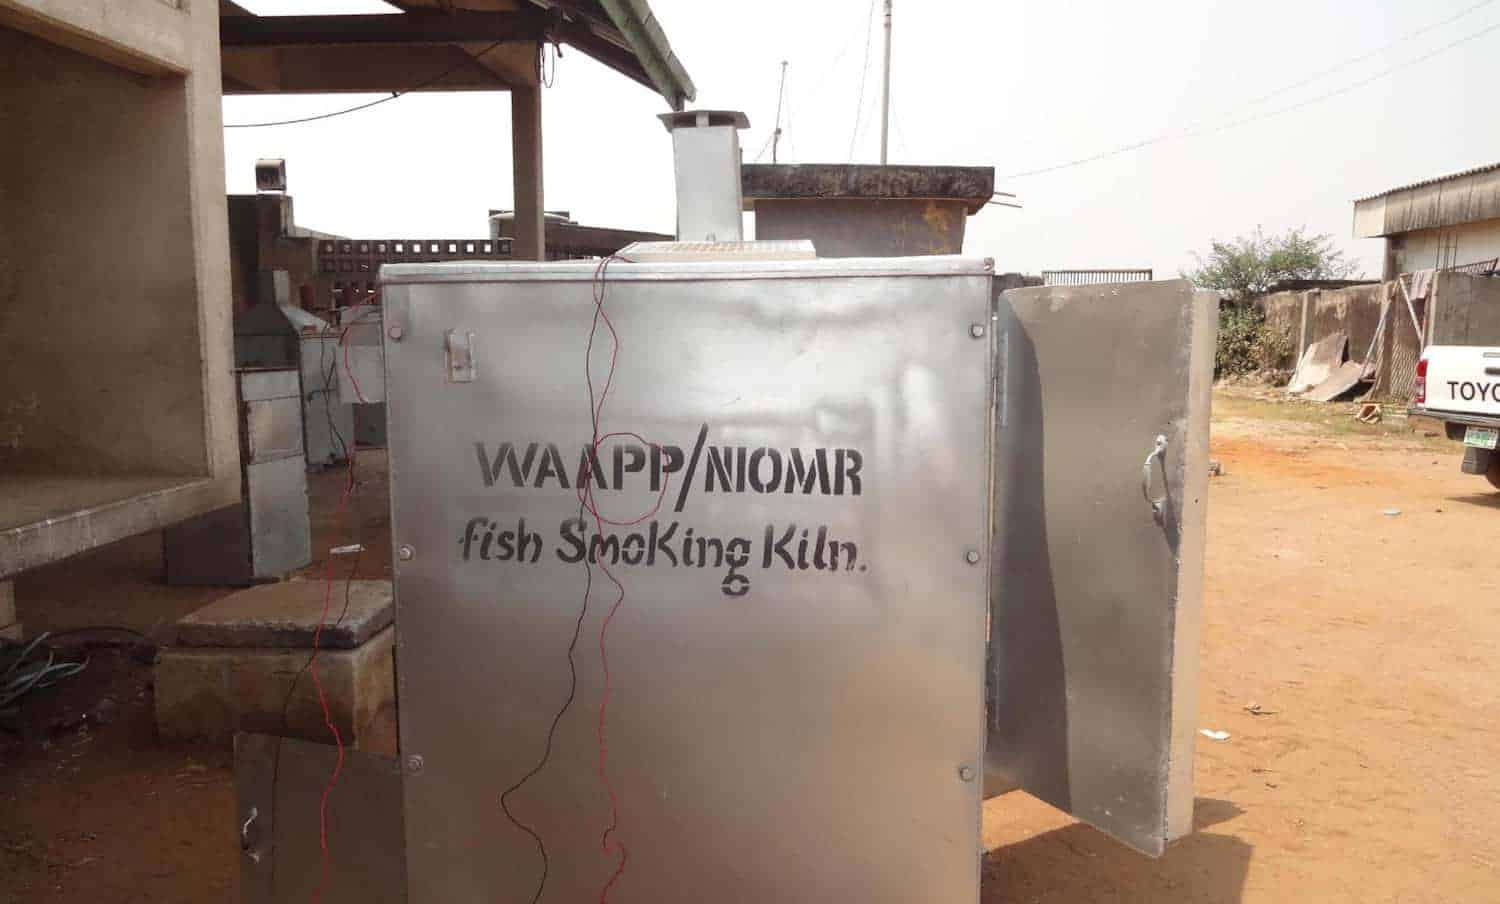 Nigeria’s modern fish smoking kiln is improving livelihoods of fish producers in West Africa, ensuring that 40 percent of their catch doesn’t go to waste.